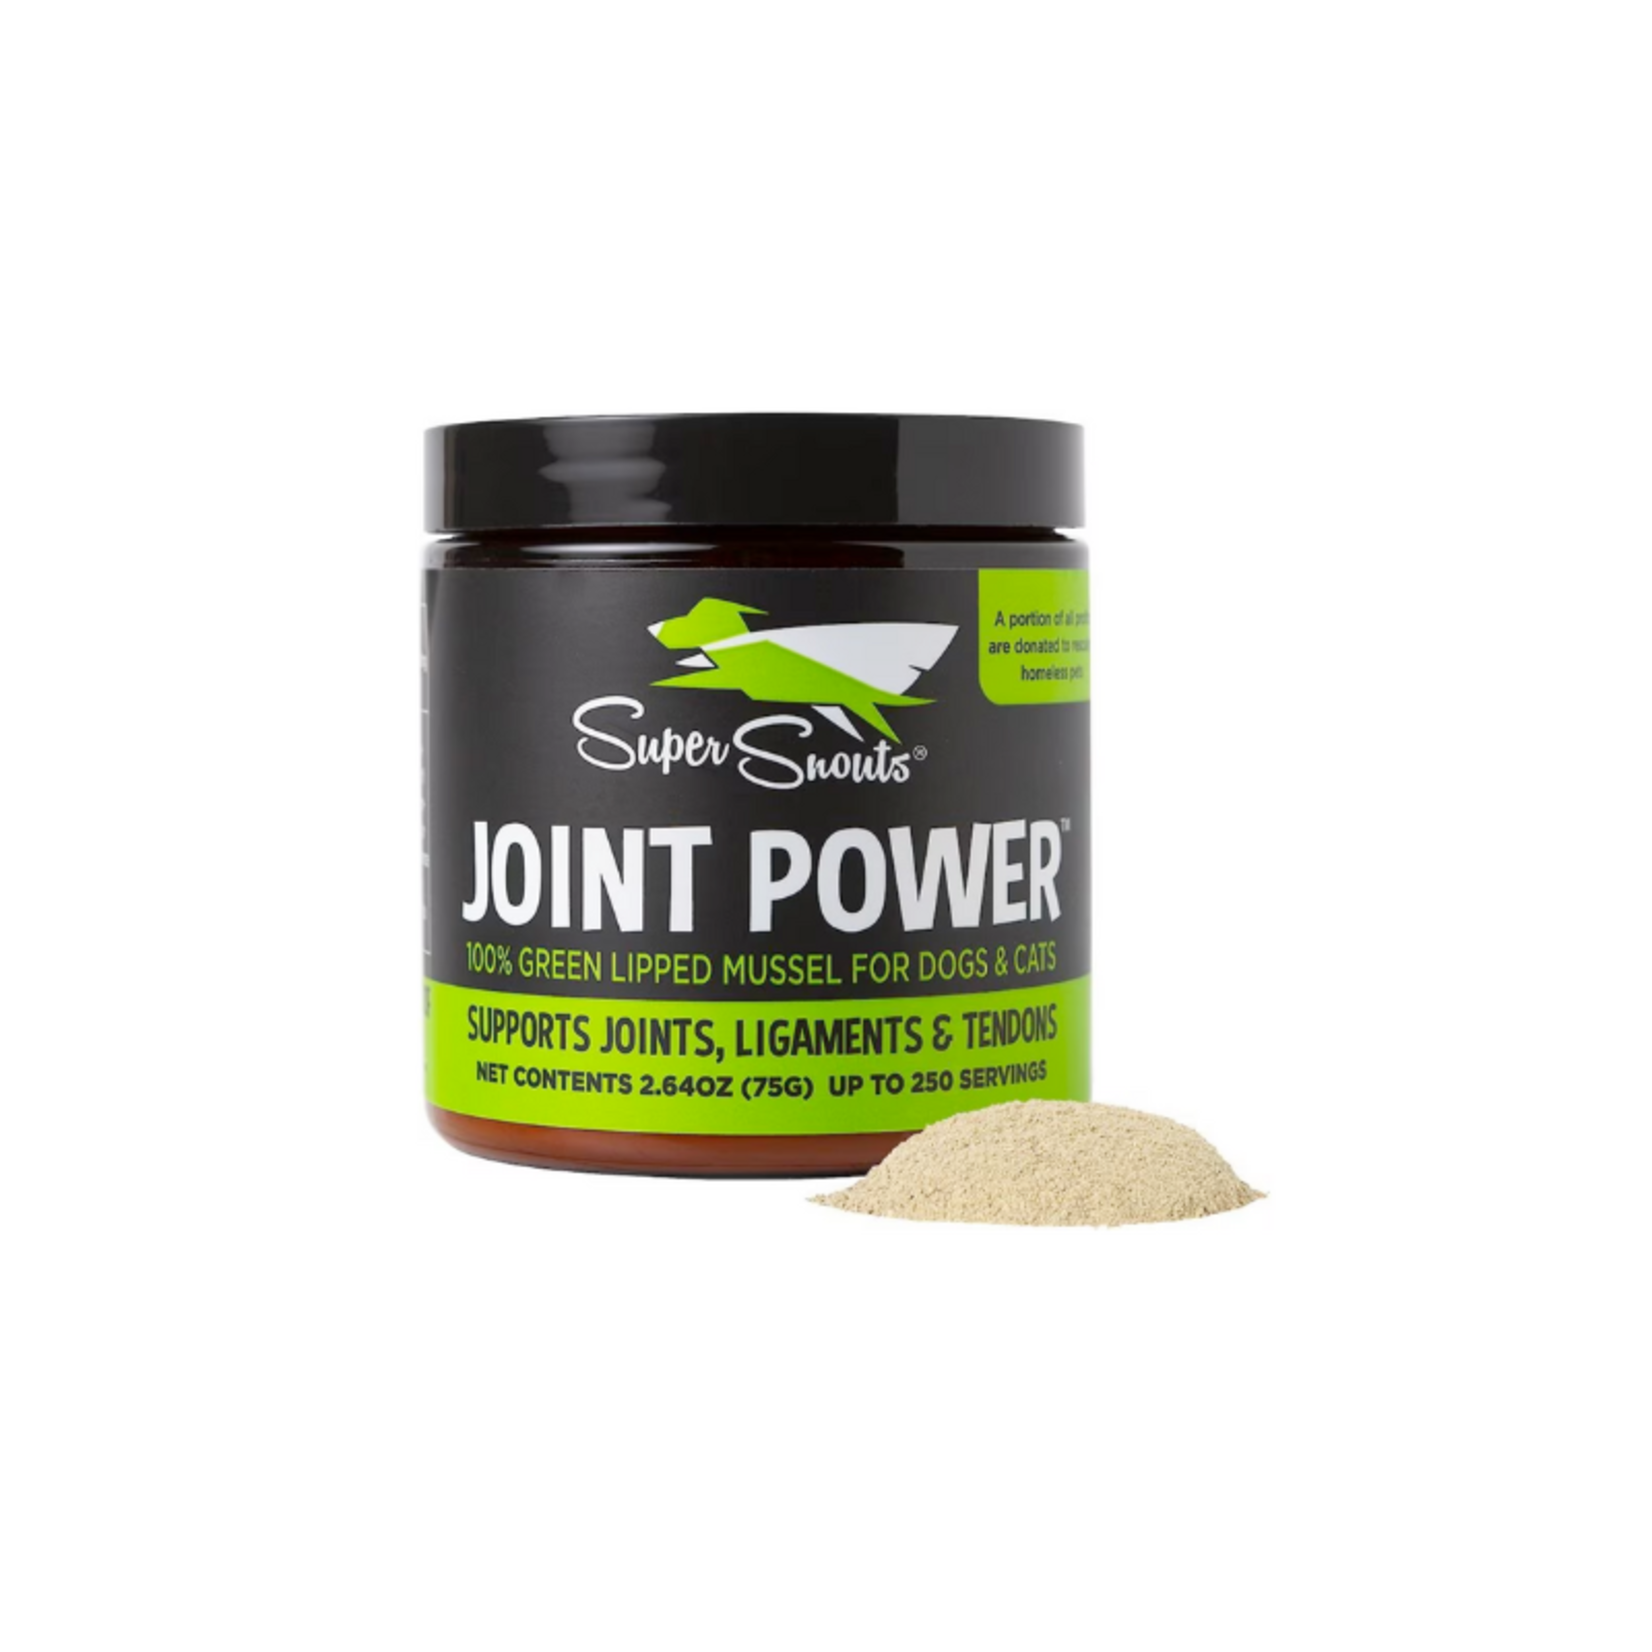 Diggin' Your Dog 2.64 oz. - Joint Power - Green Lipped Mussel Powder for Dogs & Cats - Super Snouts